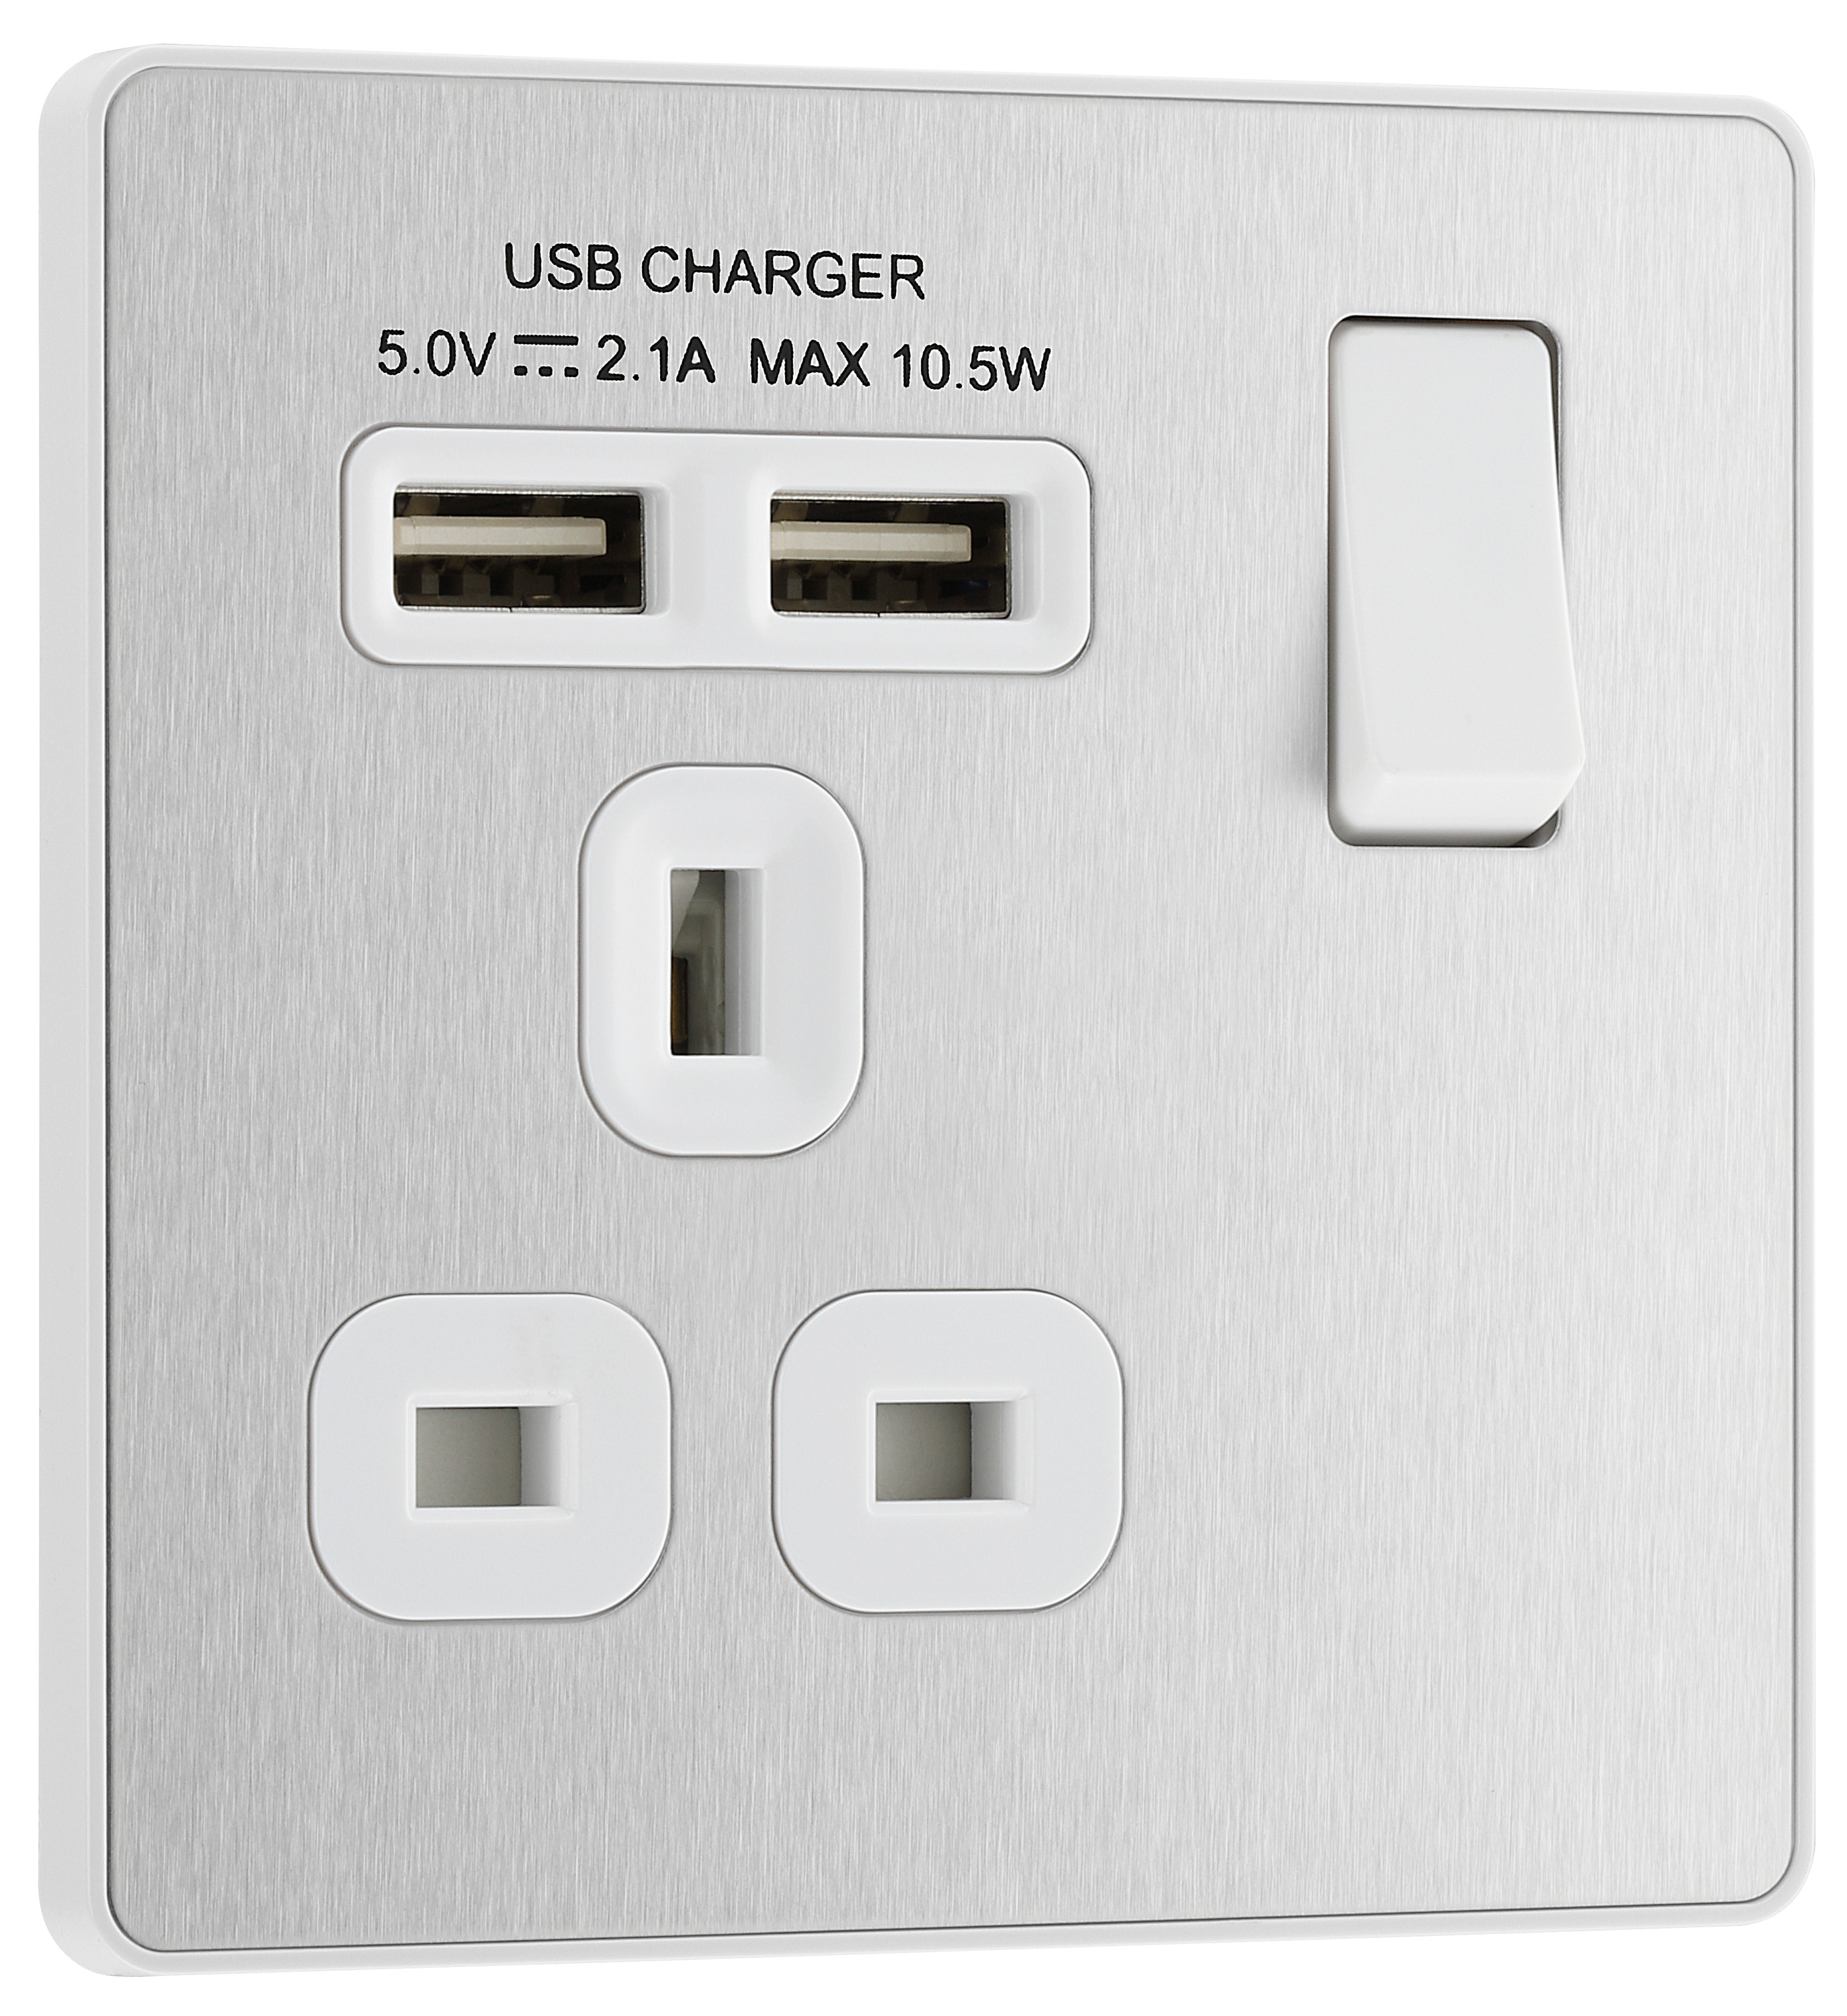 BG Evolve Brushed Steel 13A Single Switched Power Socket with 2 x USB (2.1A)